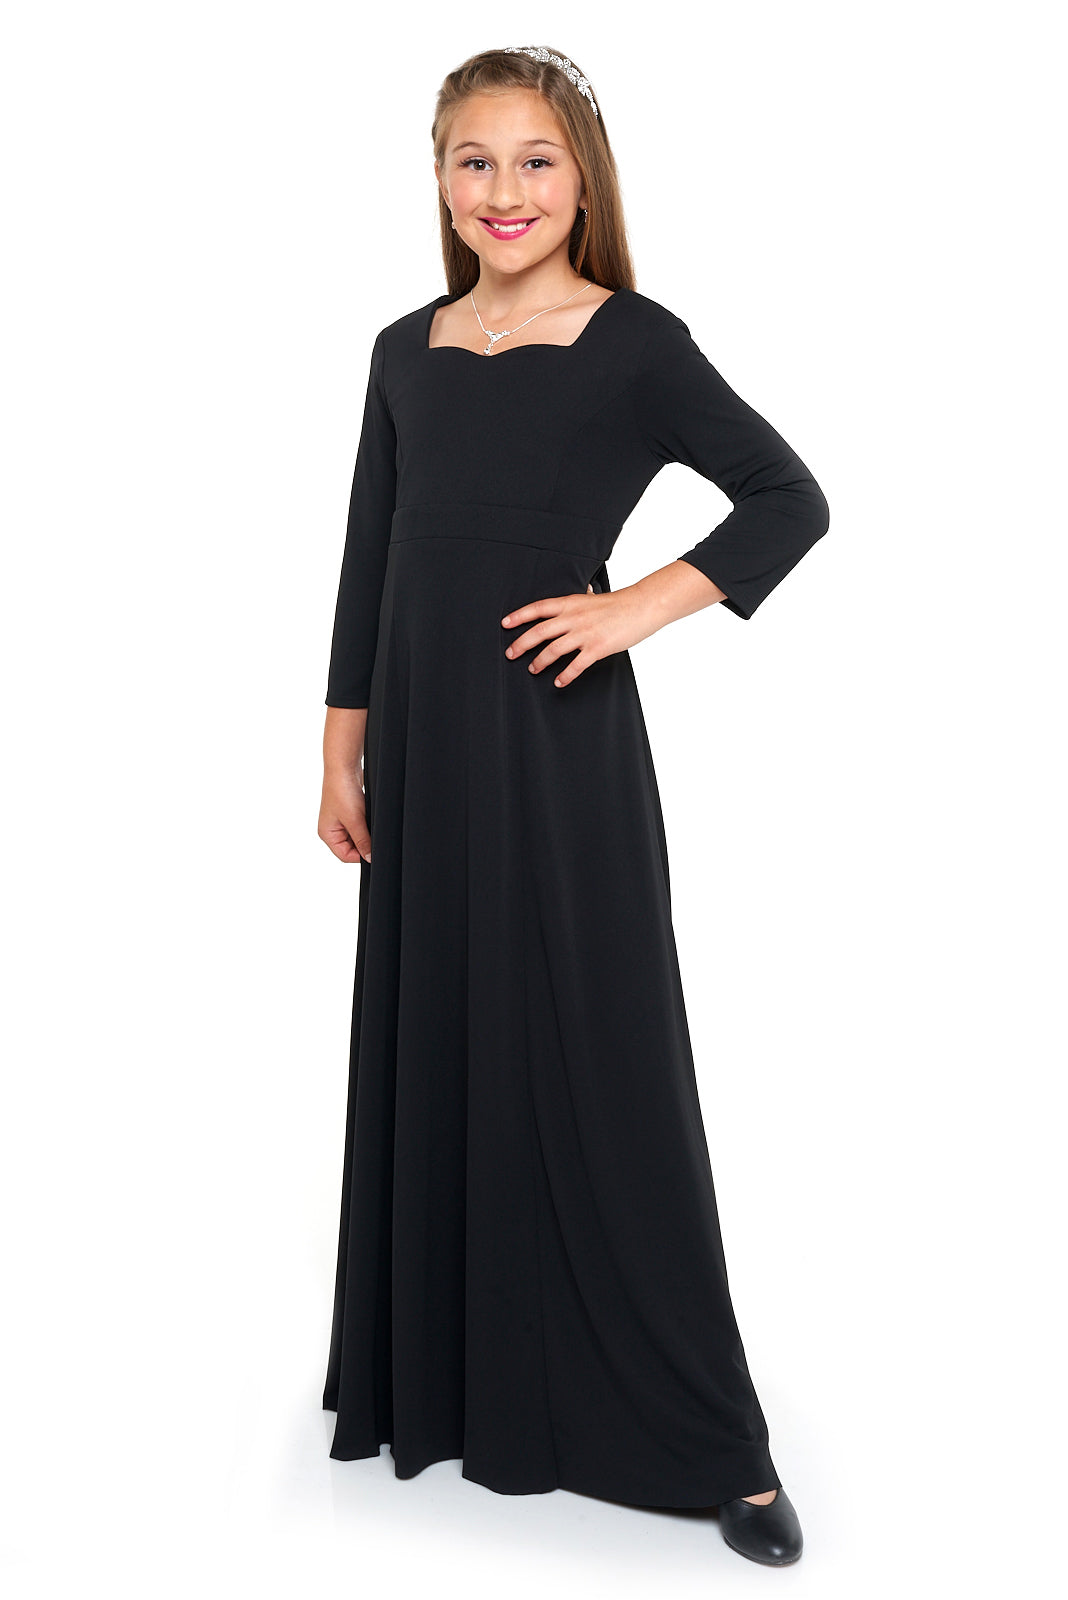 TAYLOR (Style #120Y) - Sweetheart Neckline, 3/4 Sleeve Dress -Youth